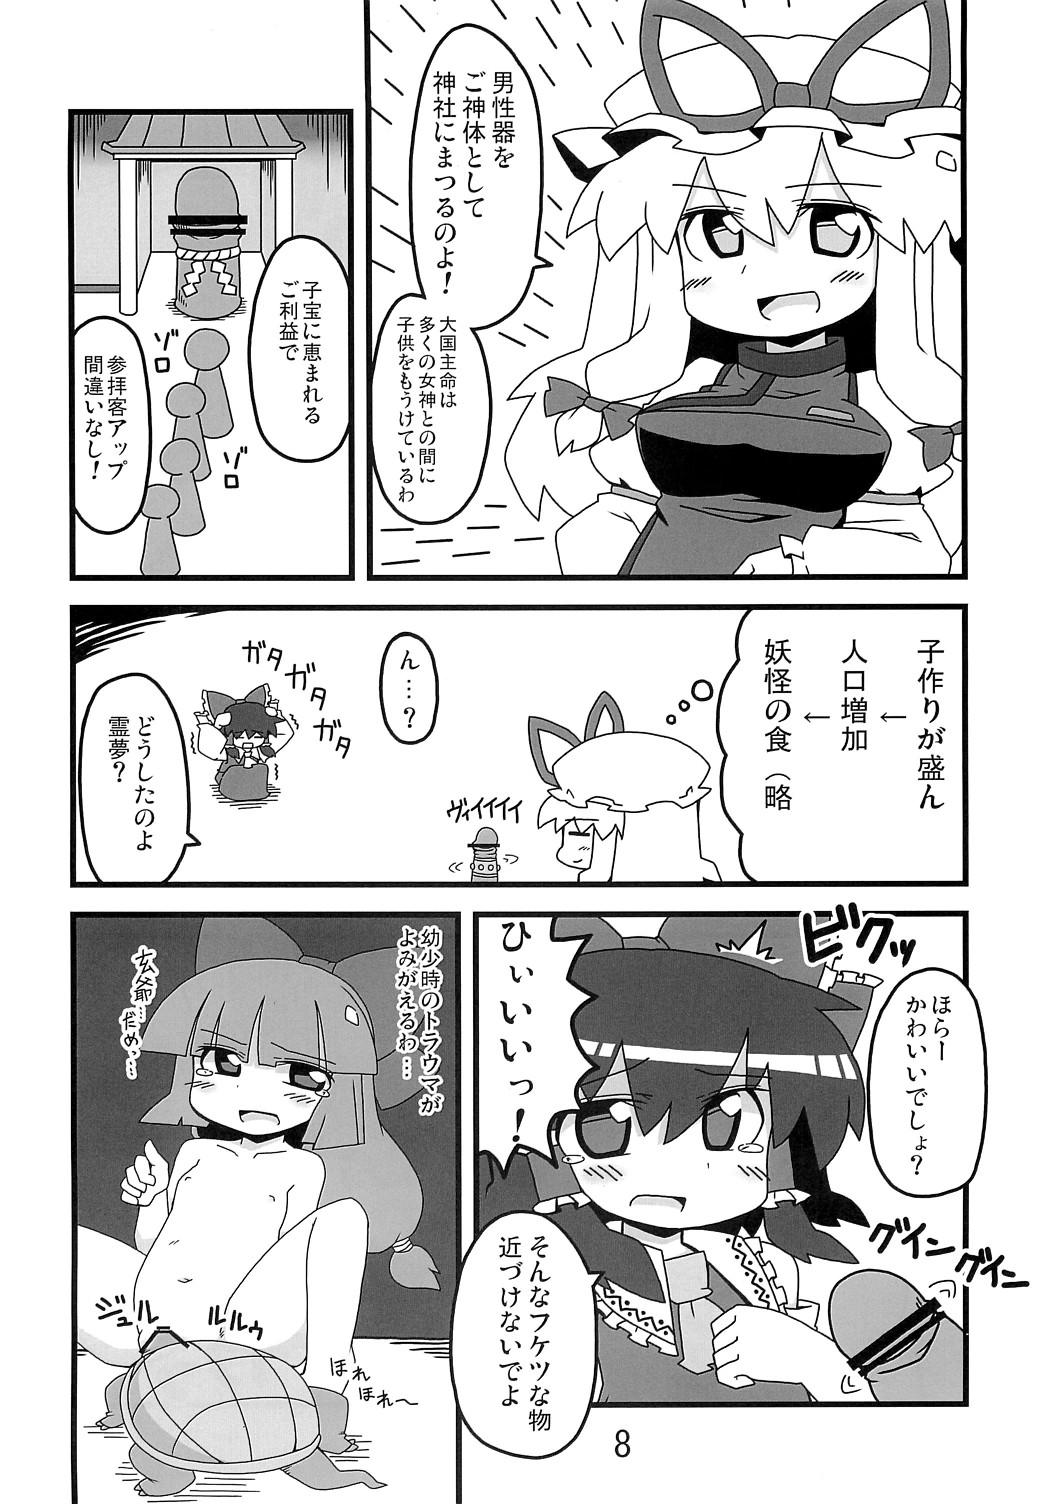 Girls 東方豊年祭 - Touhou project Arabe - Page 7